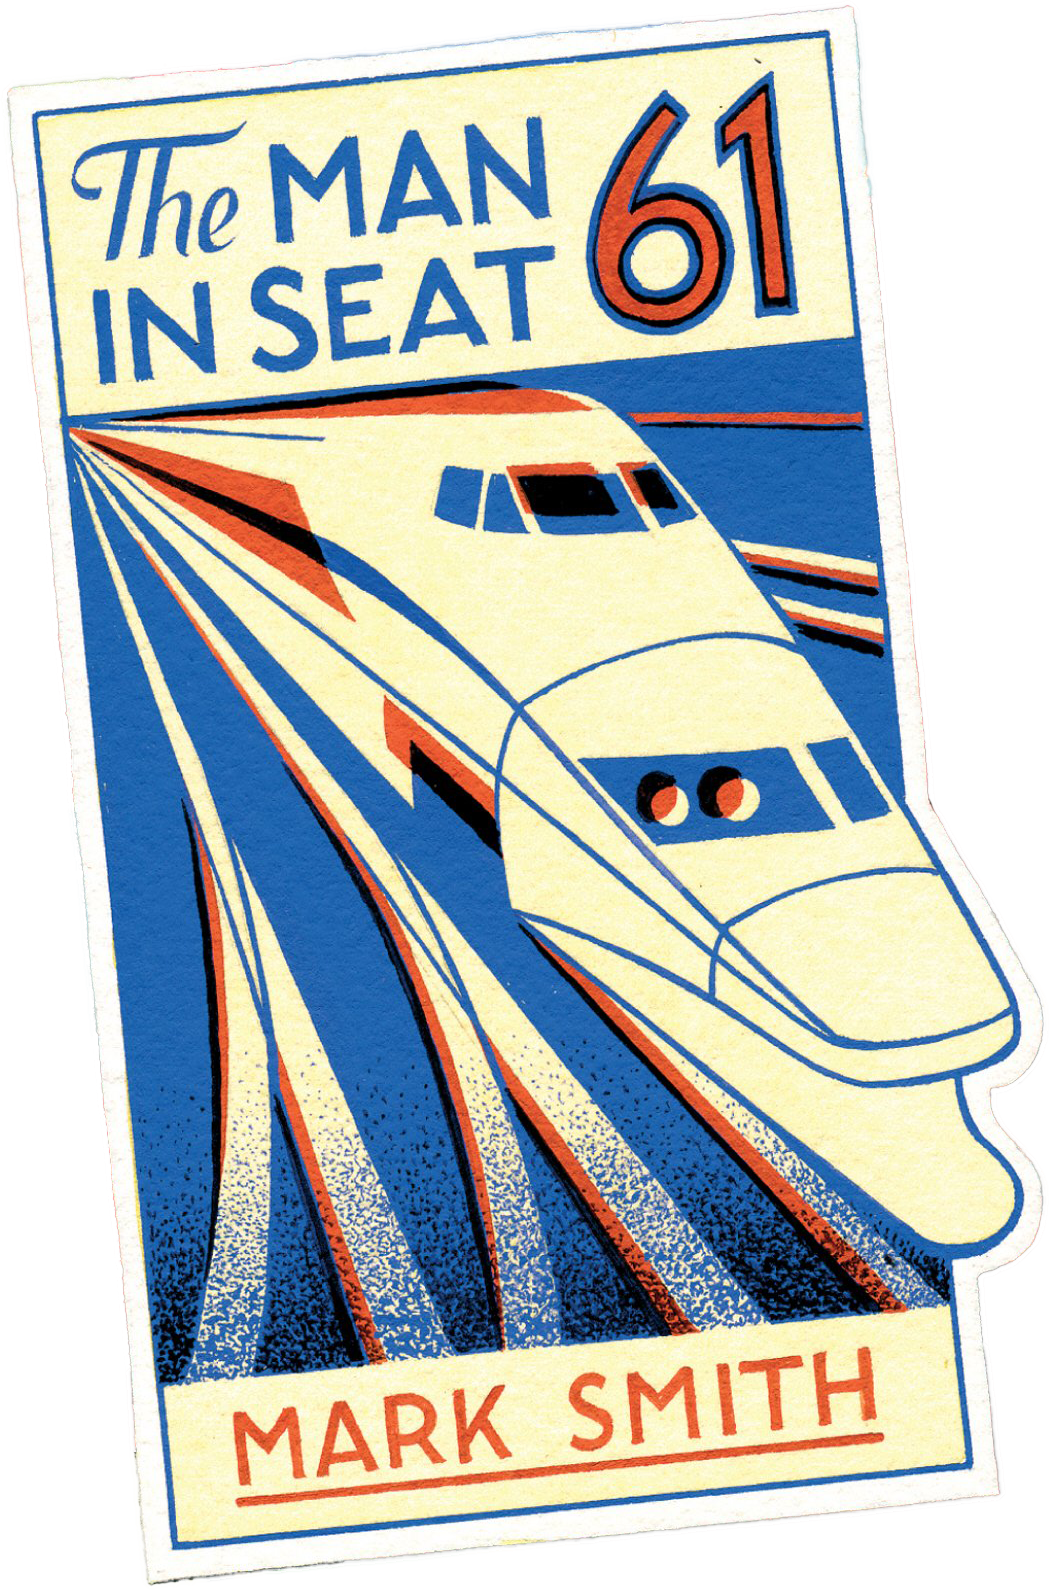 The Man in Seat 61